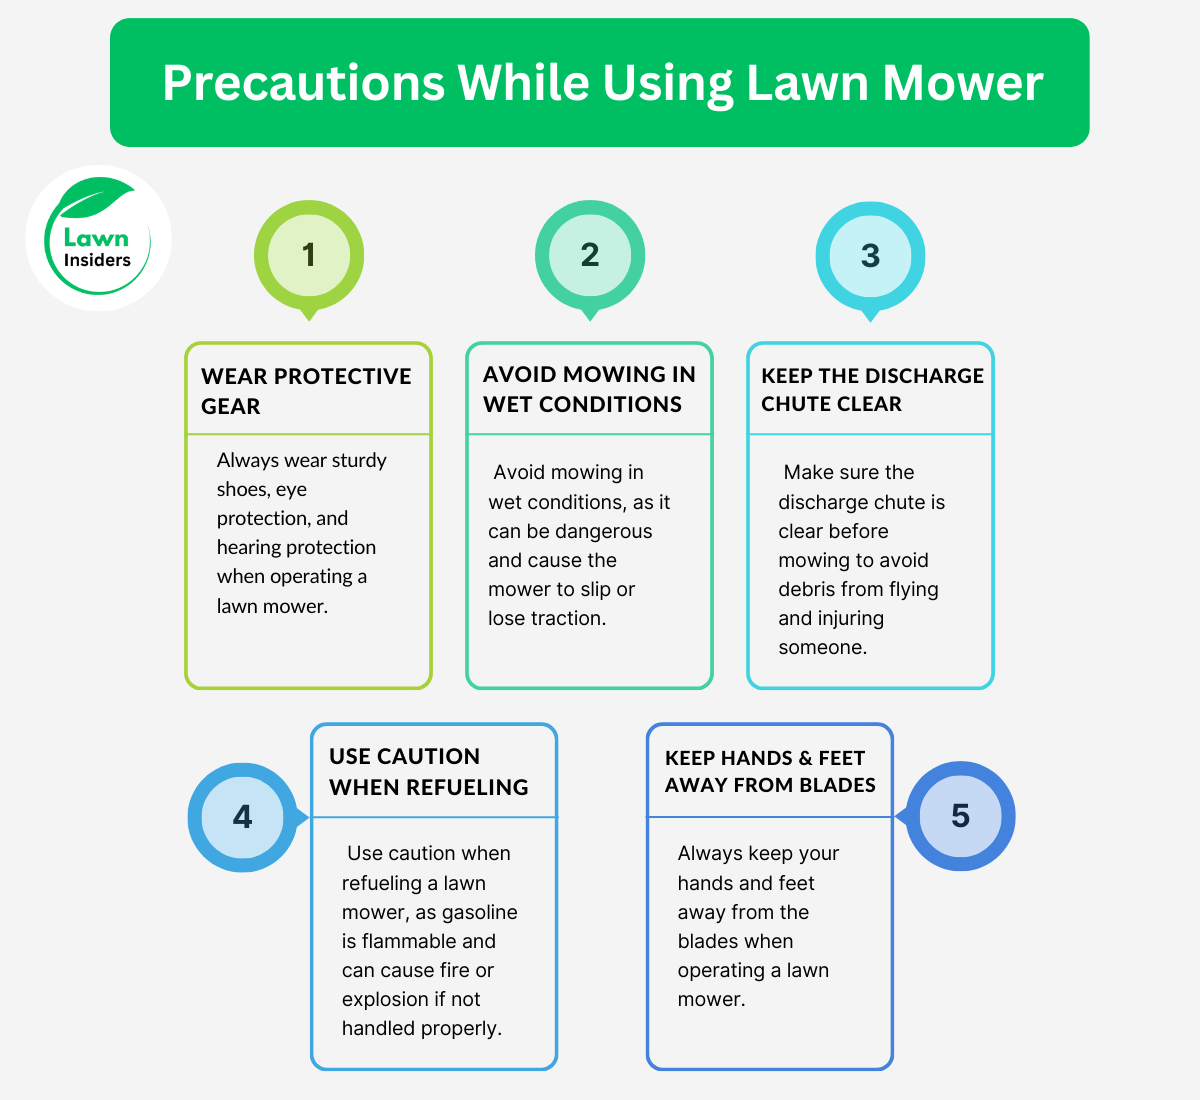 Precautions While Using Lawn Mower